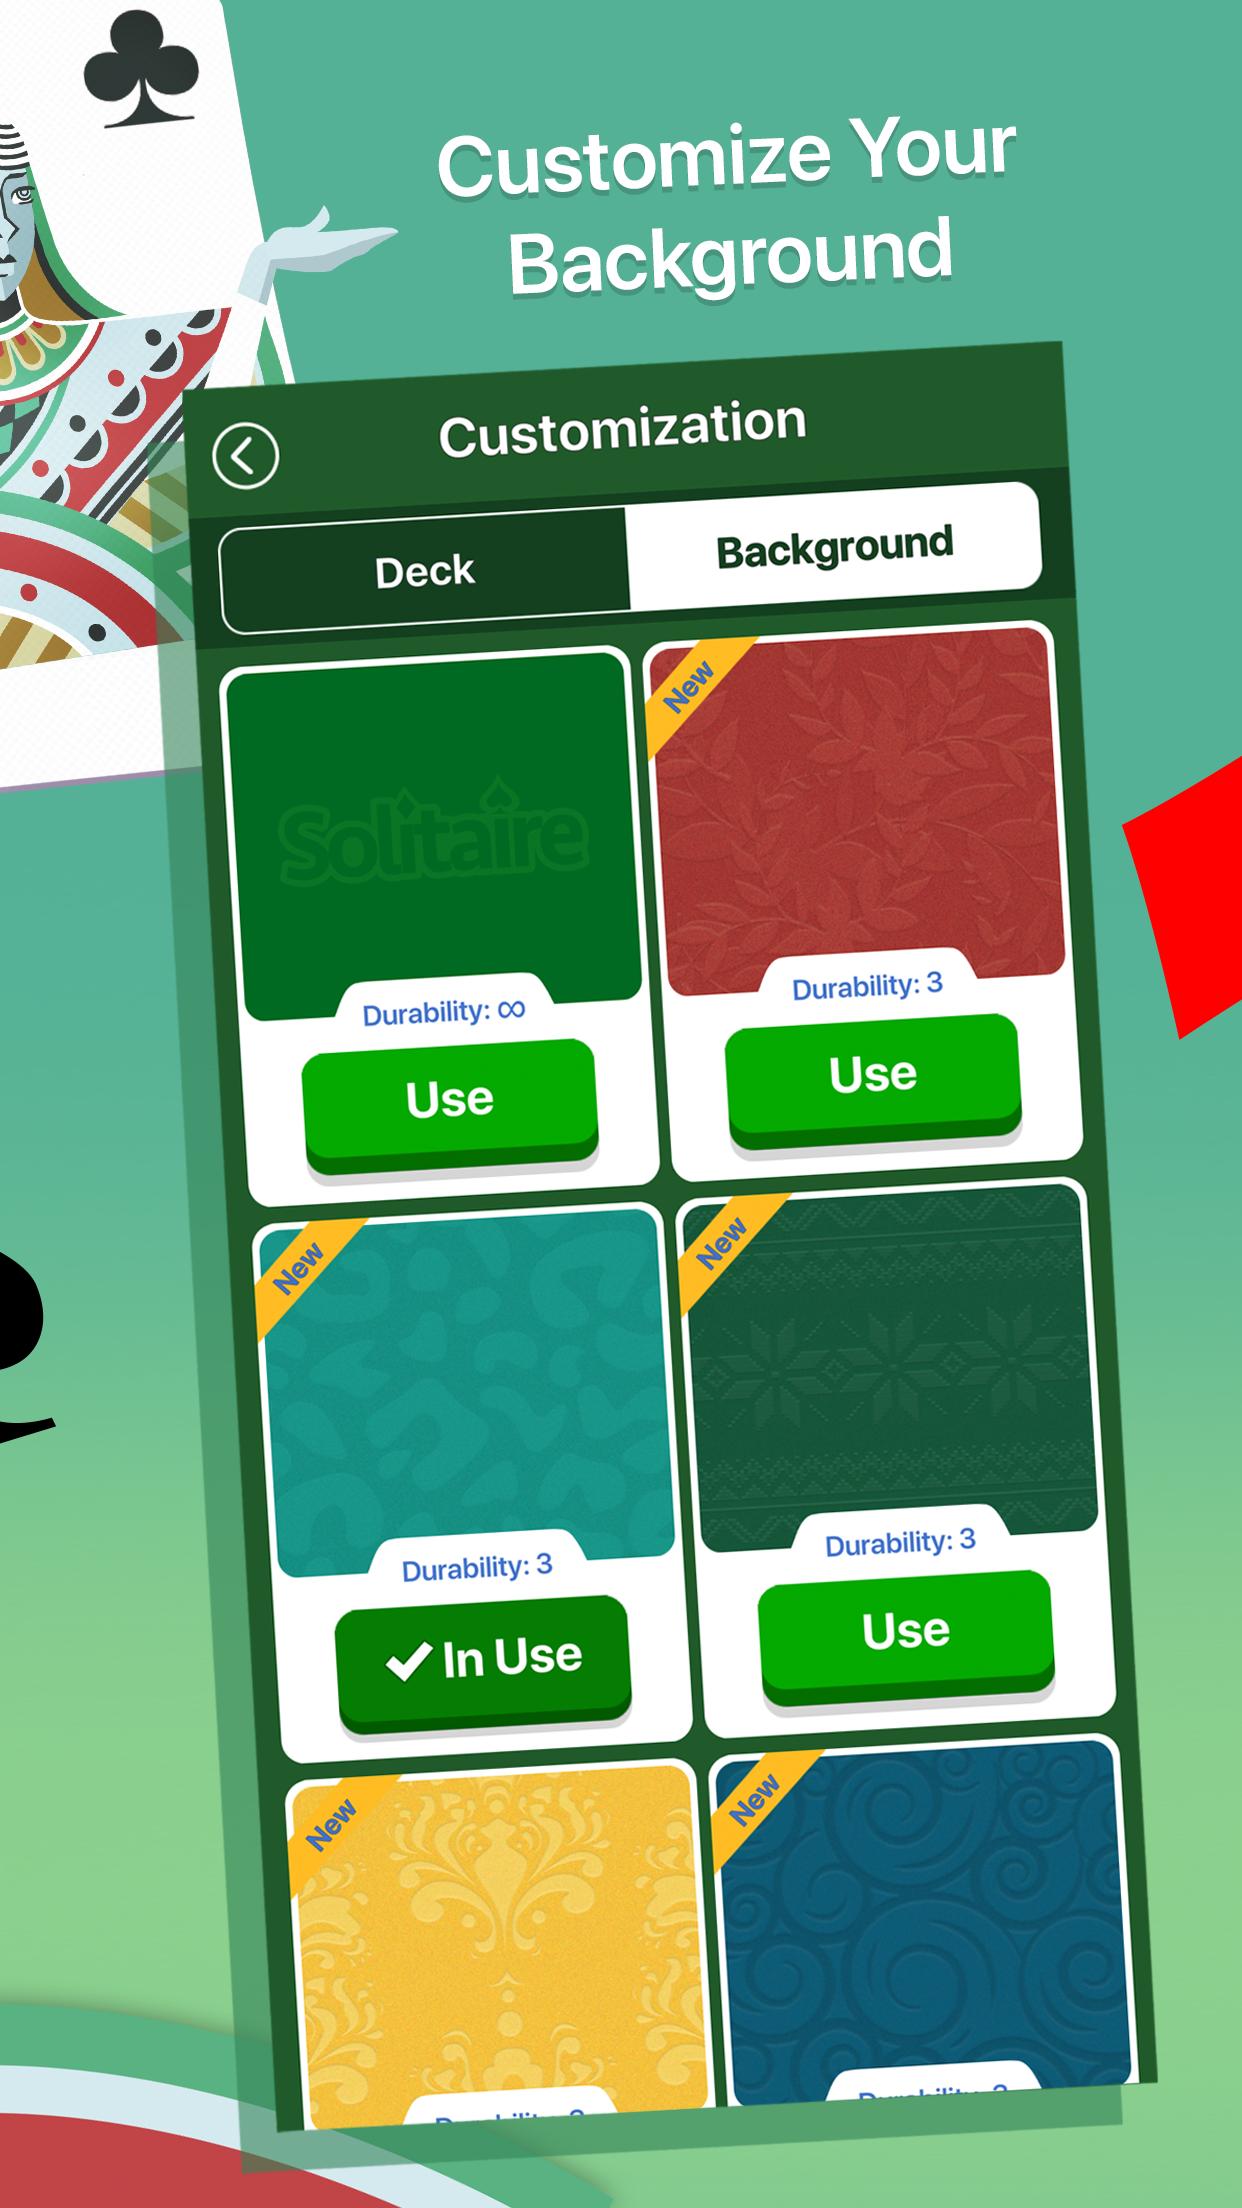 Solitaire For Android Apk Download - dife ml roblox robux how to get free robux on android 2017